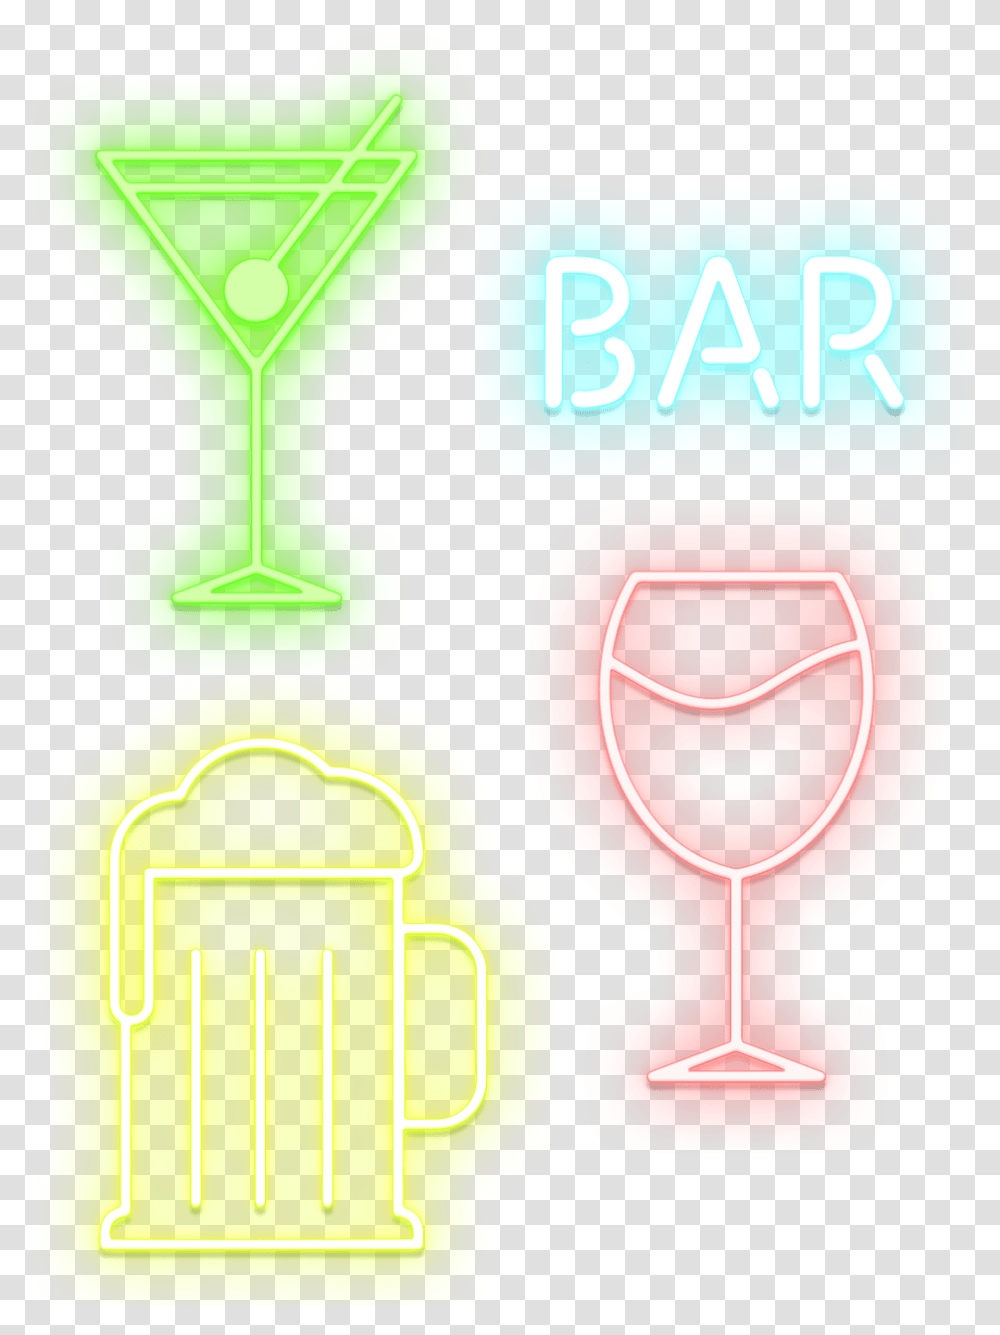 Sign Neon Drinks Free Image On Pixabay Drinks Neon, Sweets, Food, Confectionery, Text Transparent Png